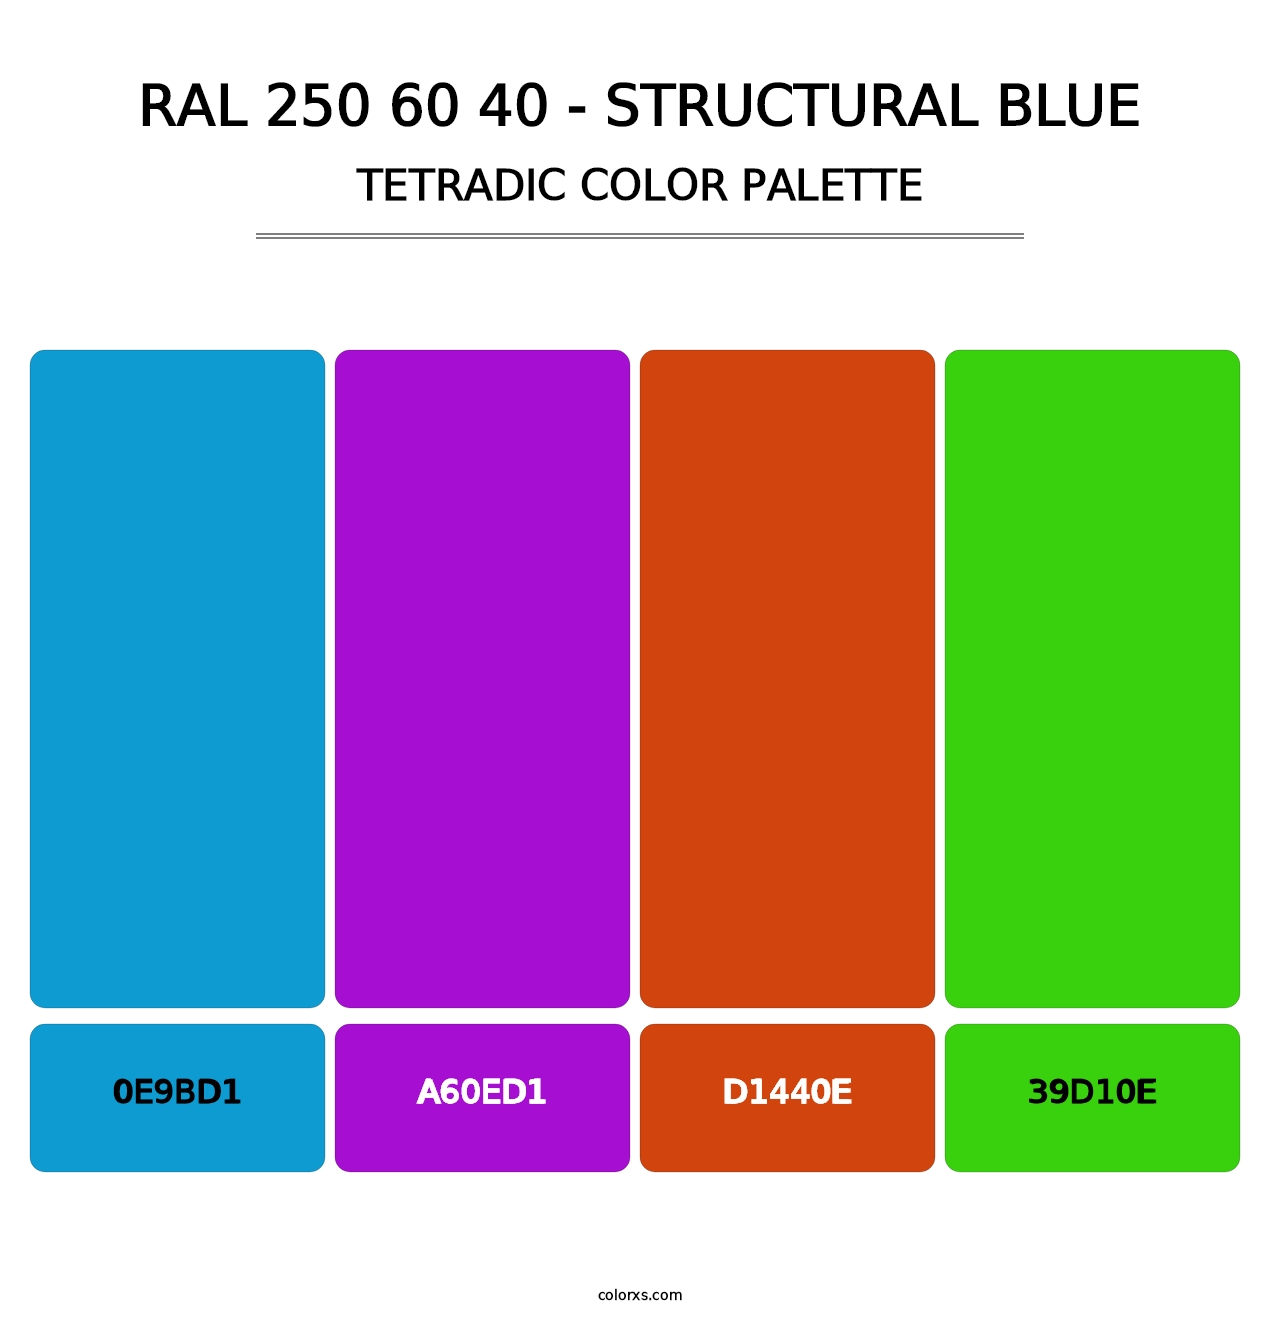 RAL 250 60 40 - Structural Blue - Tetradic Color Palette